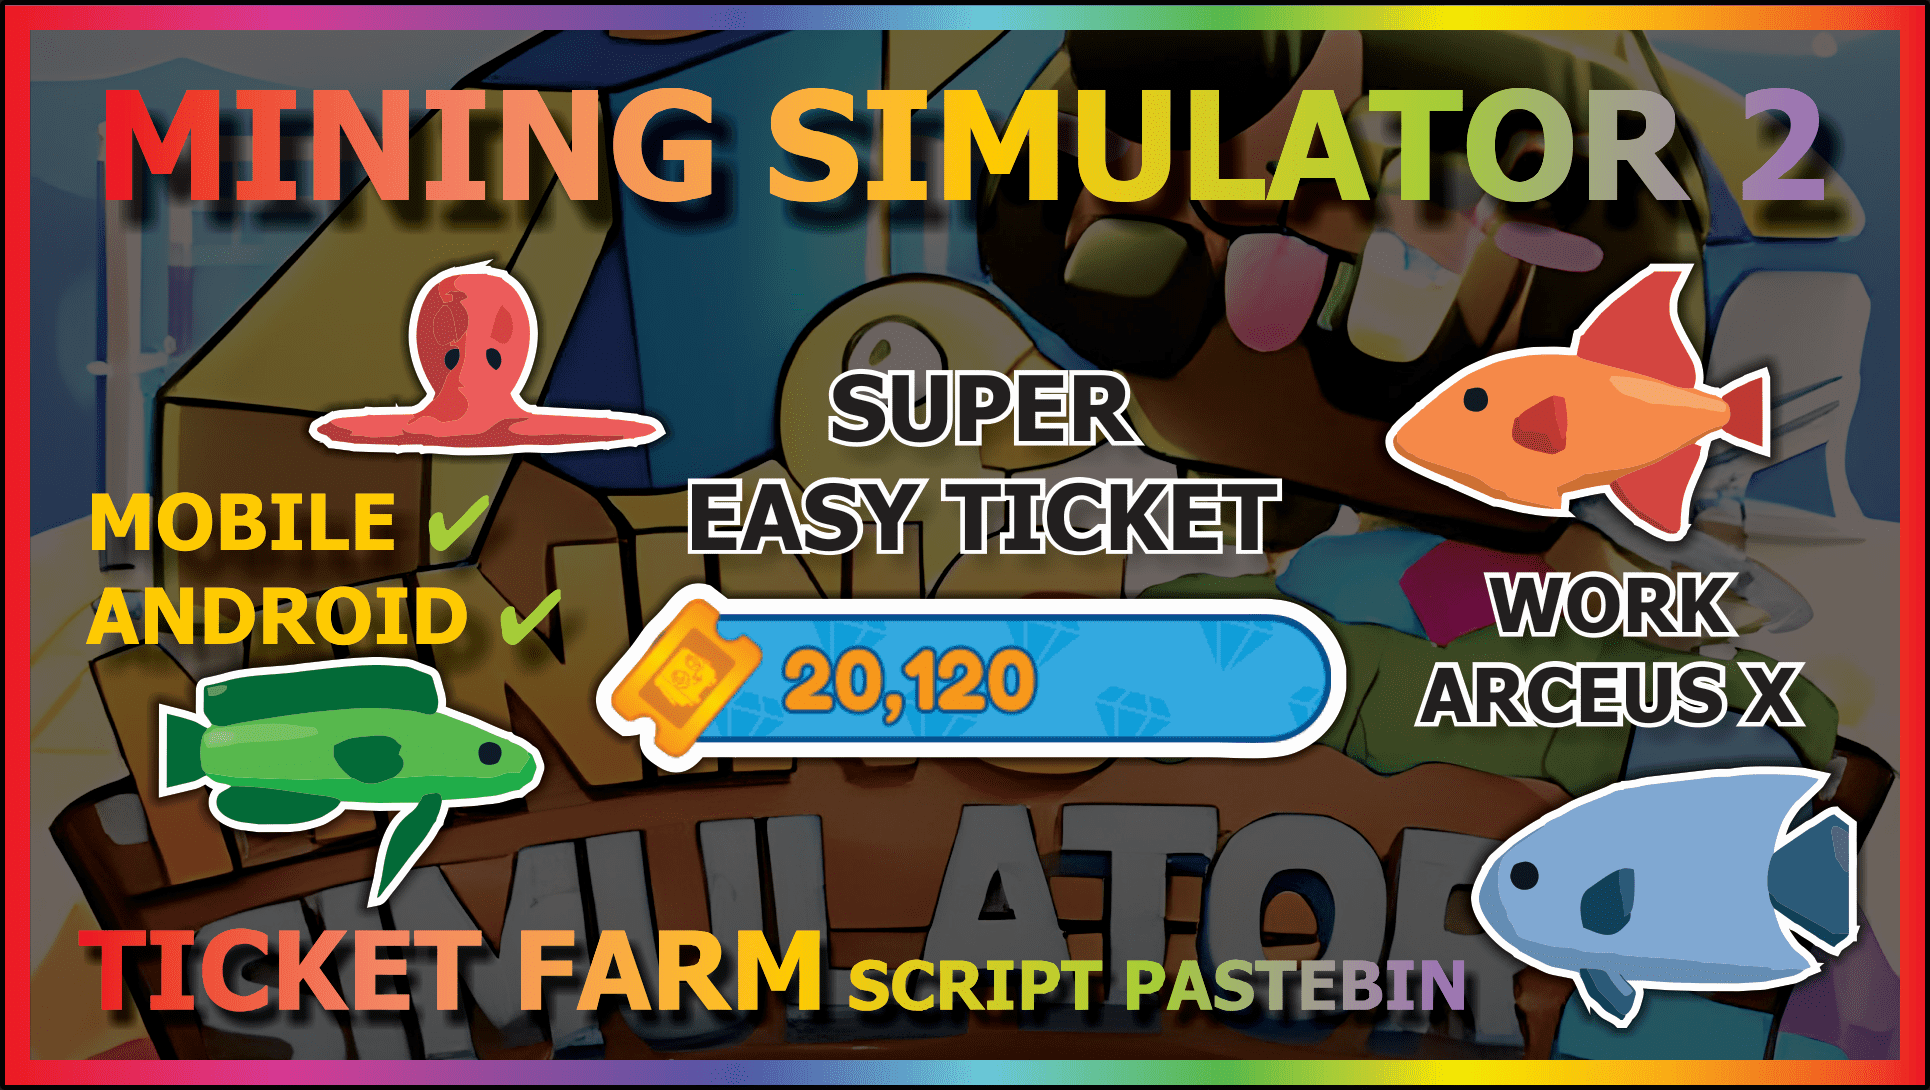 You are currently viewing MINING SIMULATOR 2 (TICKET)